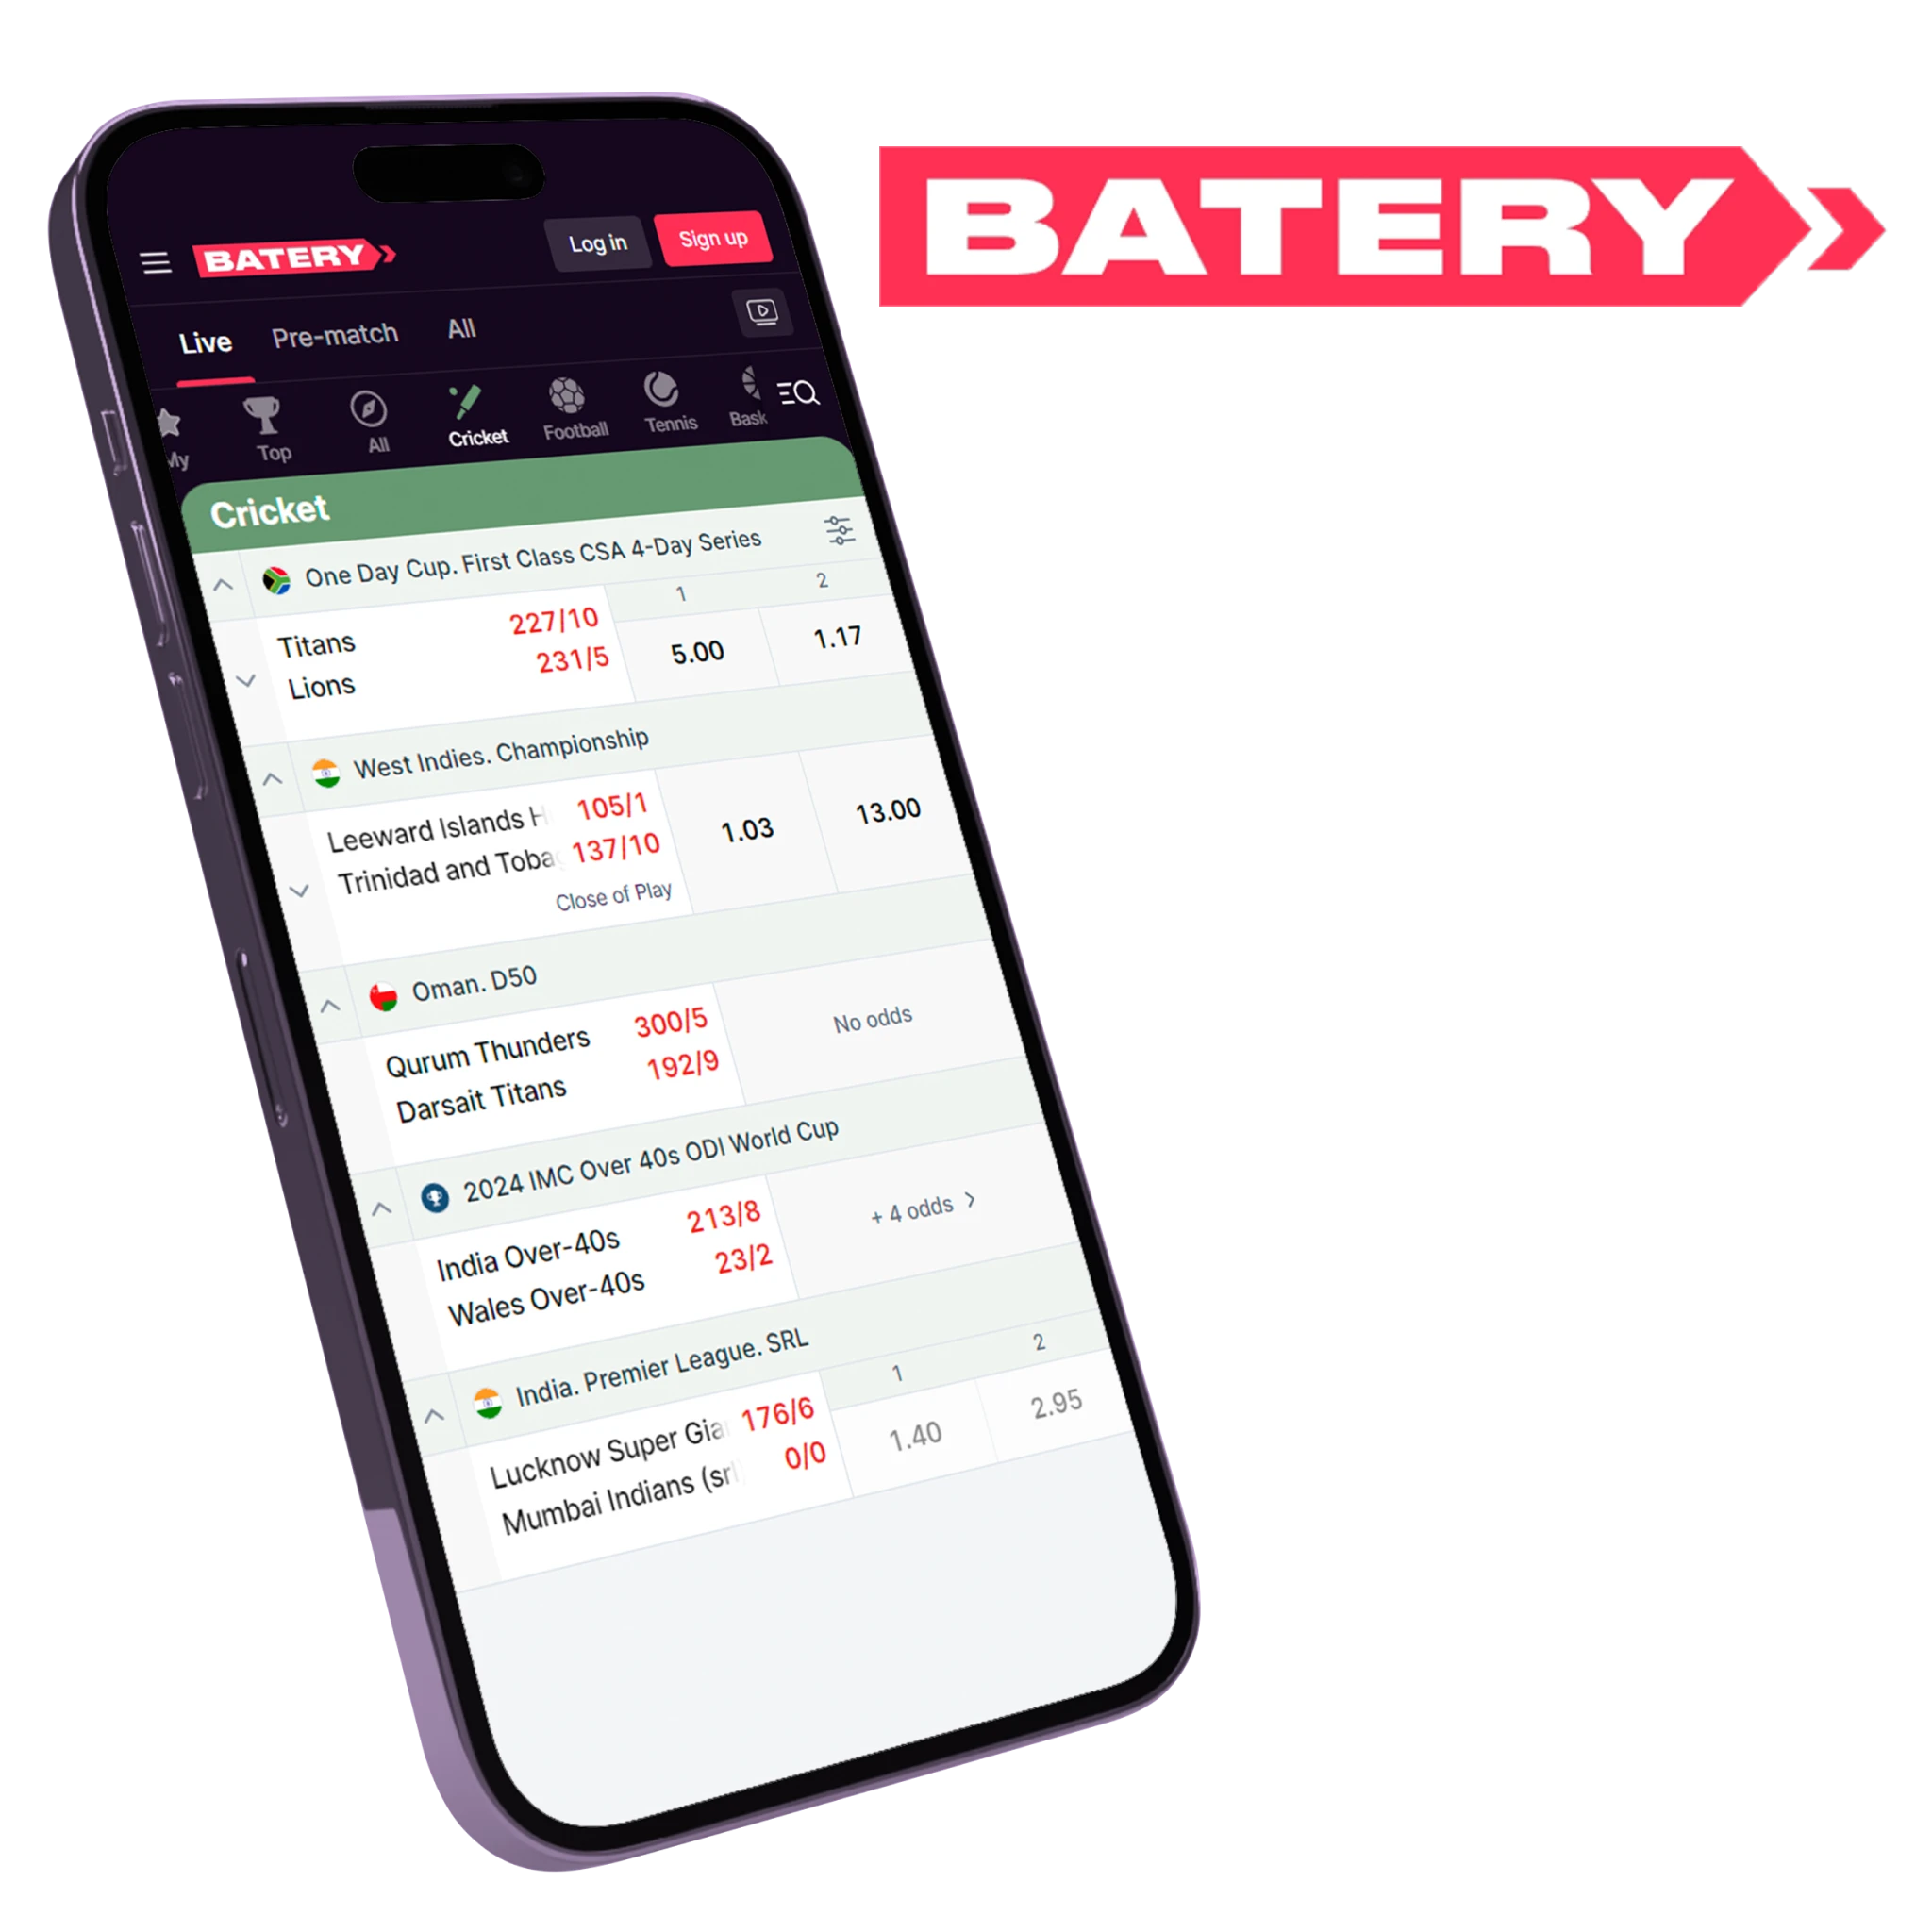 Batery app is legal and safe to bet on cricket in India.